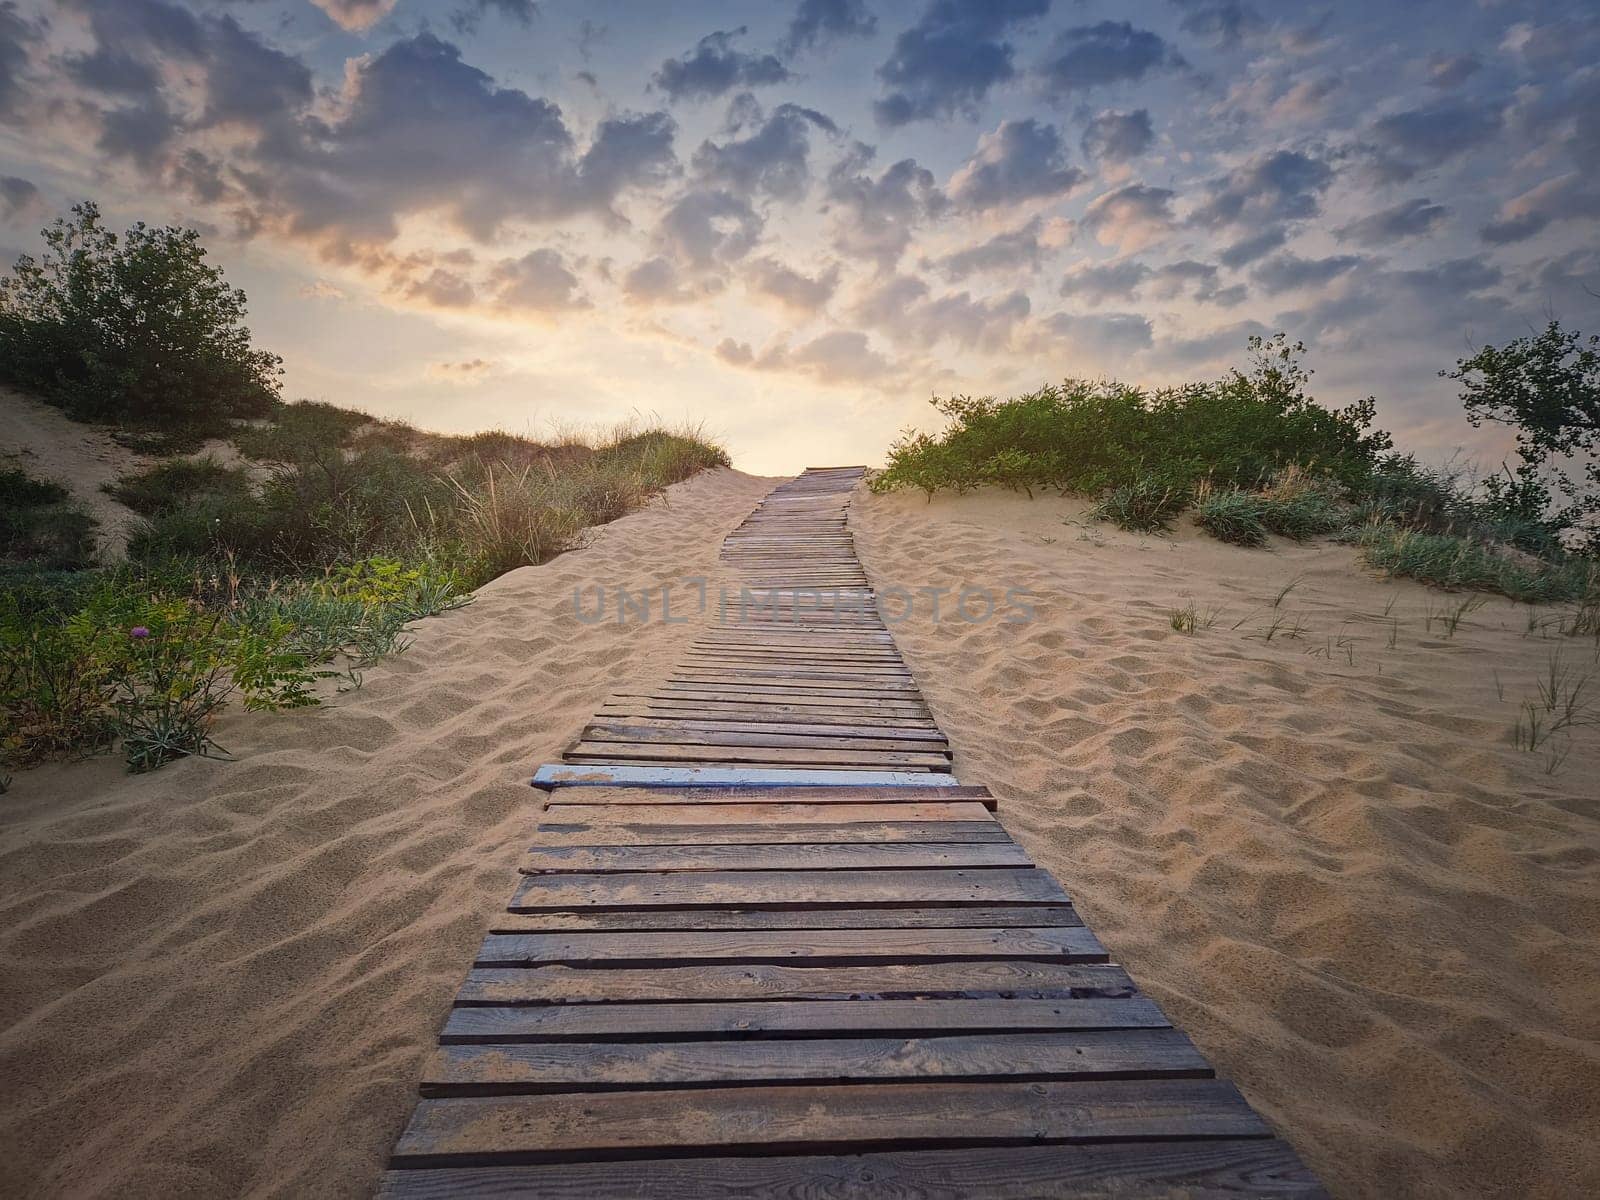 Wooden path through the sand leading to the beach. Beautiful morning sky with fluffy clouds by psychoshadow